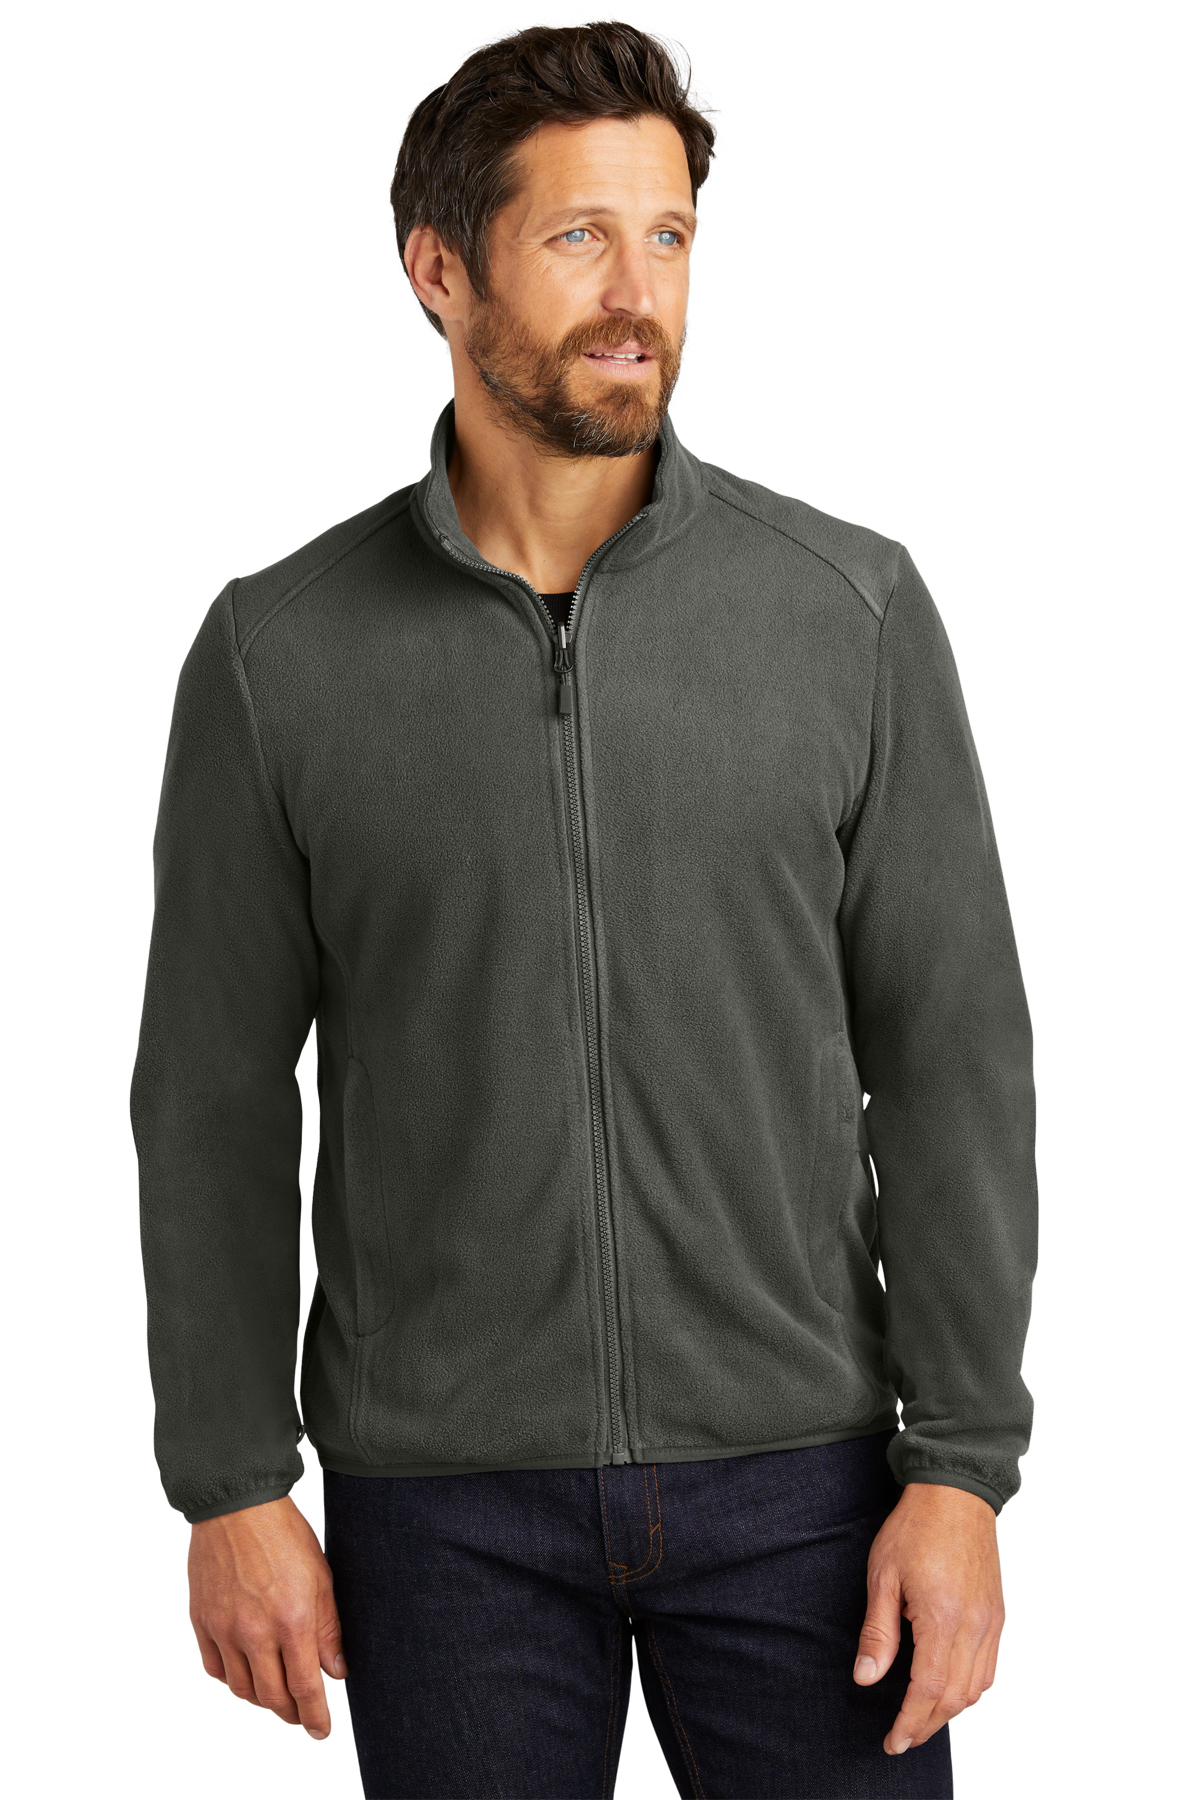 Port Authority All-Weather 3-in-1 Jacket | Product | Port Authority